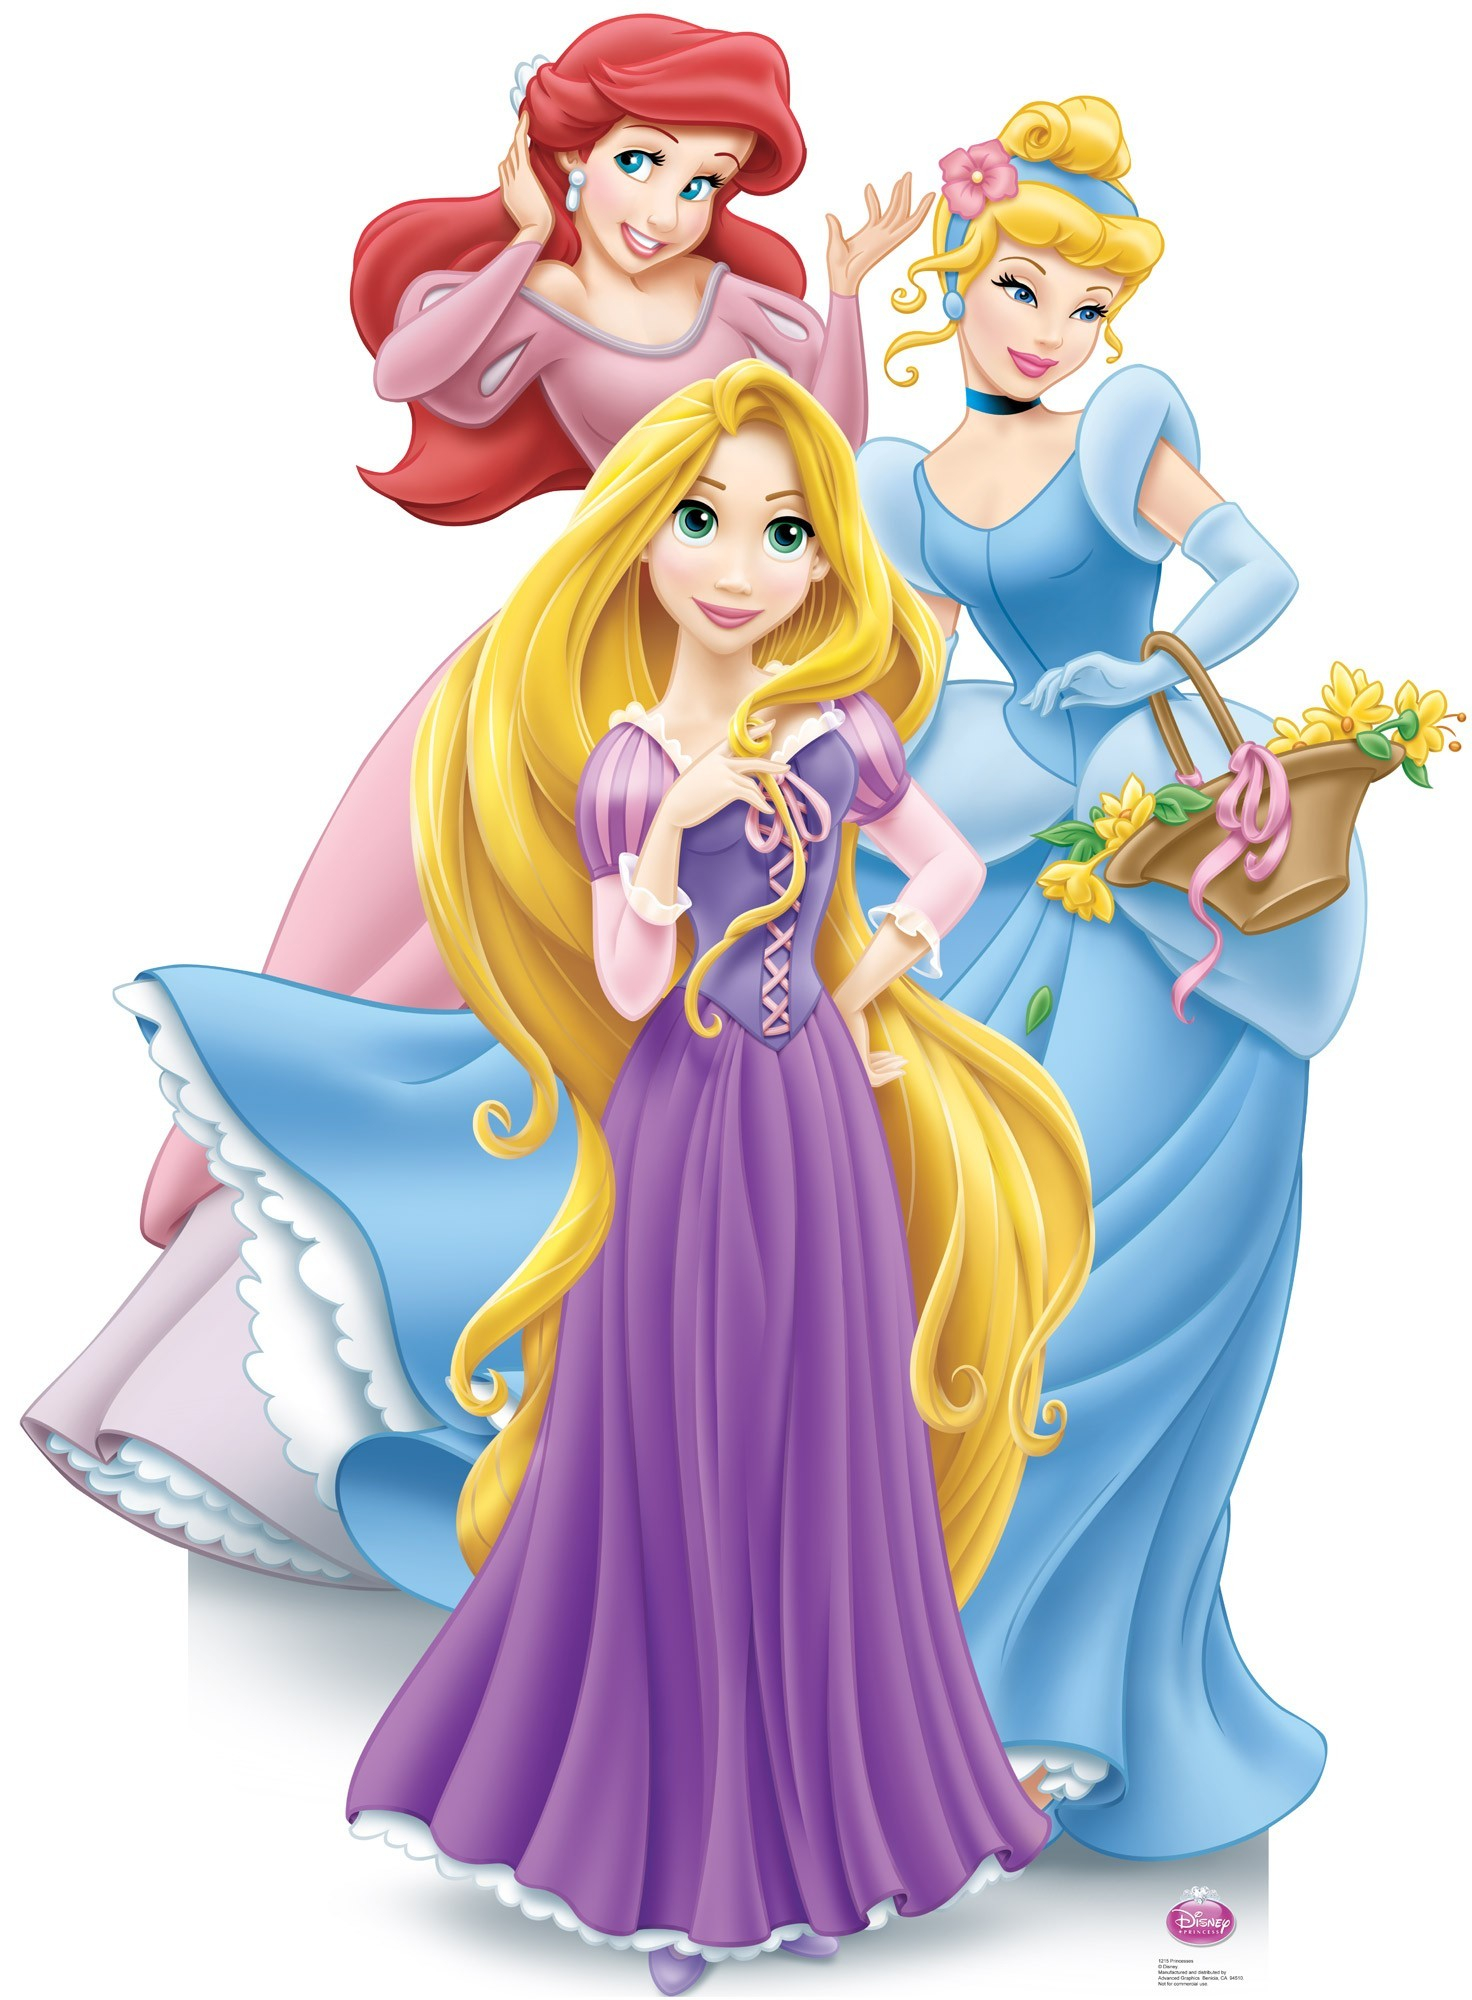 1472x2000 Disney Princess Images Free Download posted by Zoey Cunningham